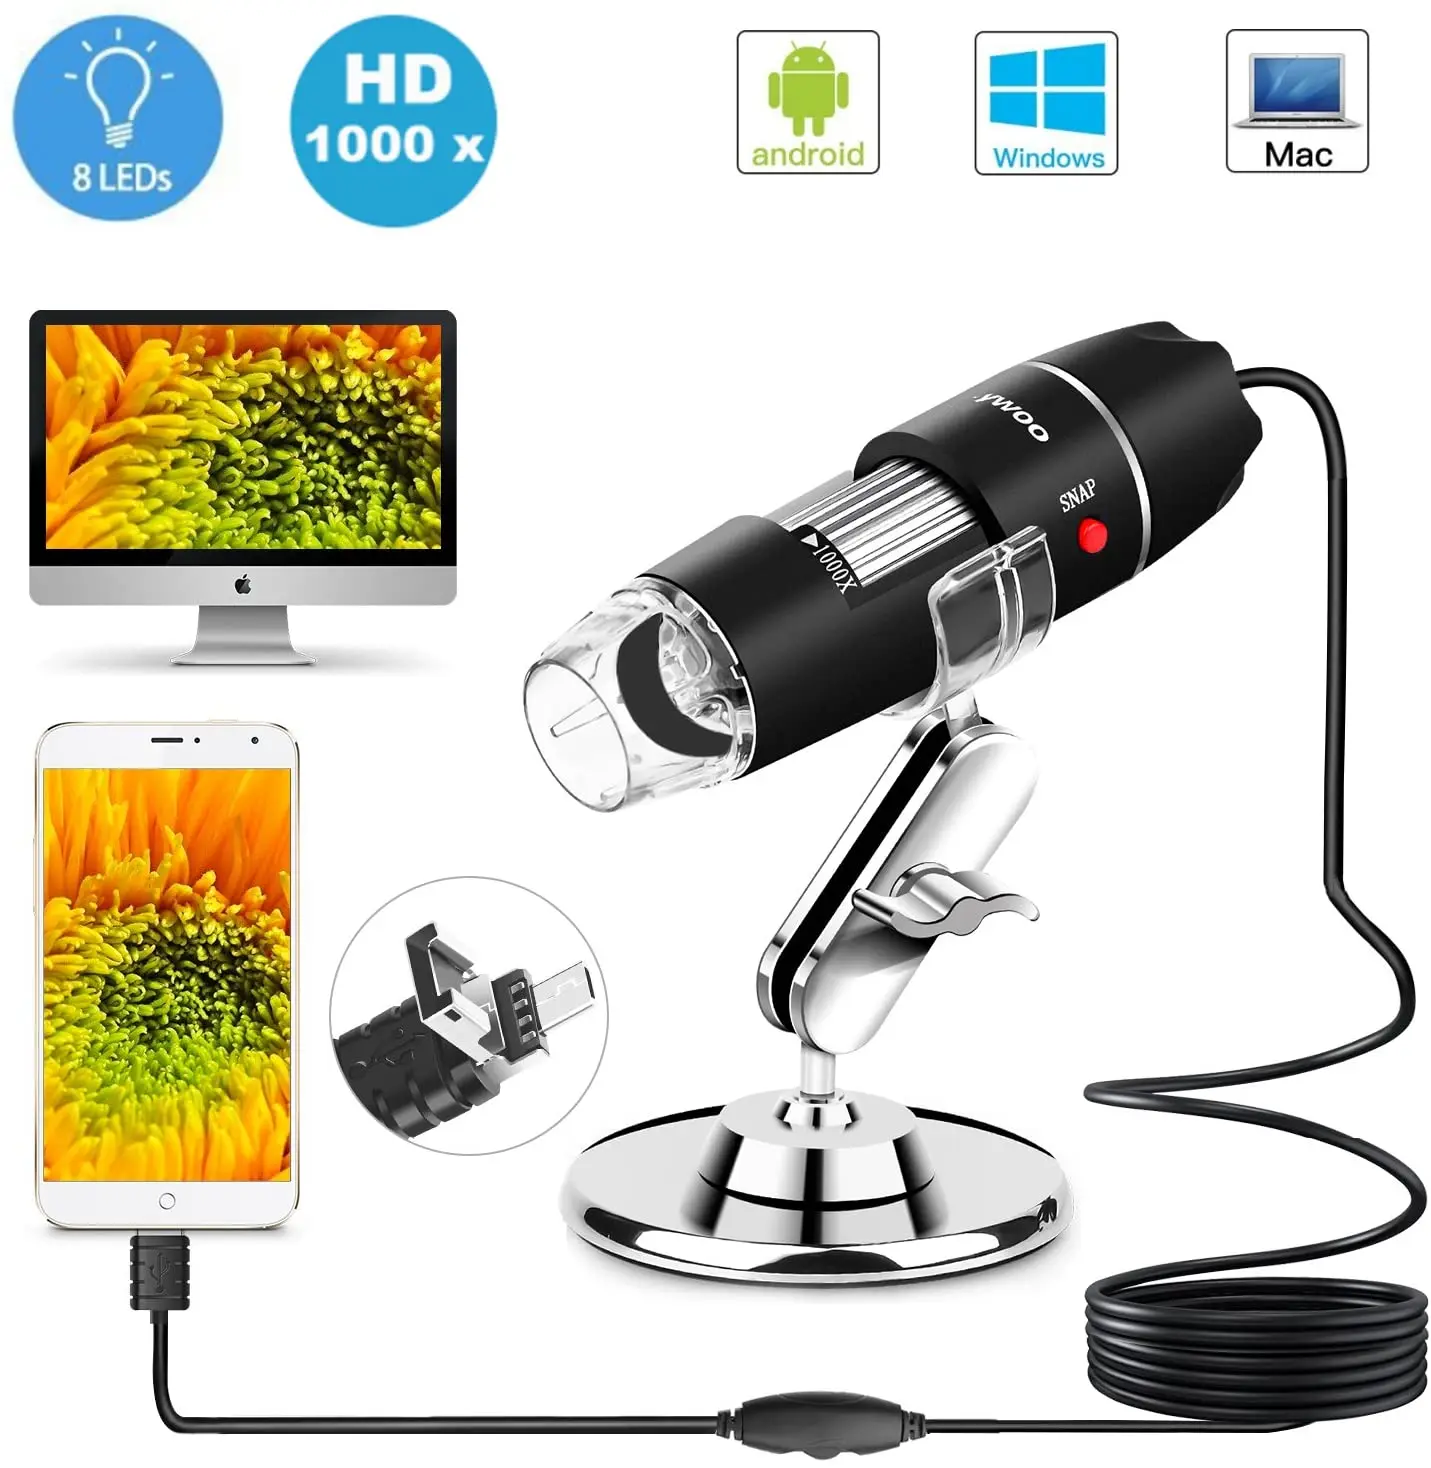 generic usb digital microscope 500x free driver download software for android